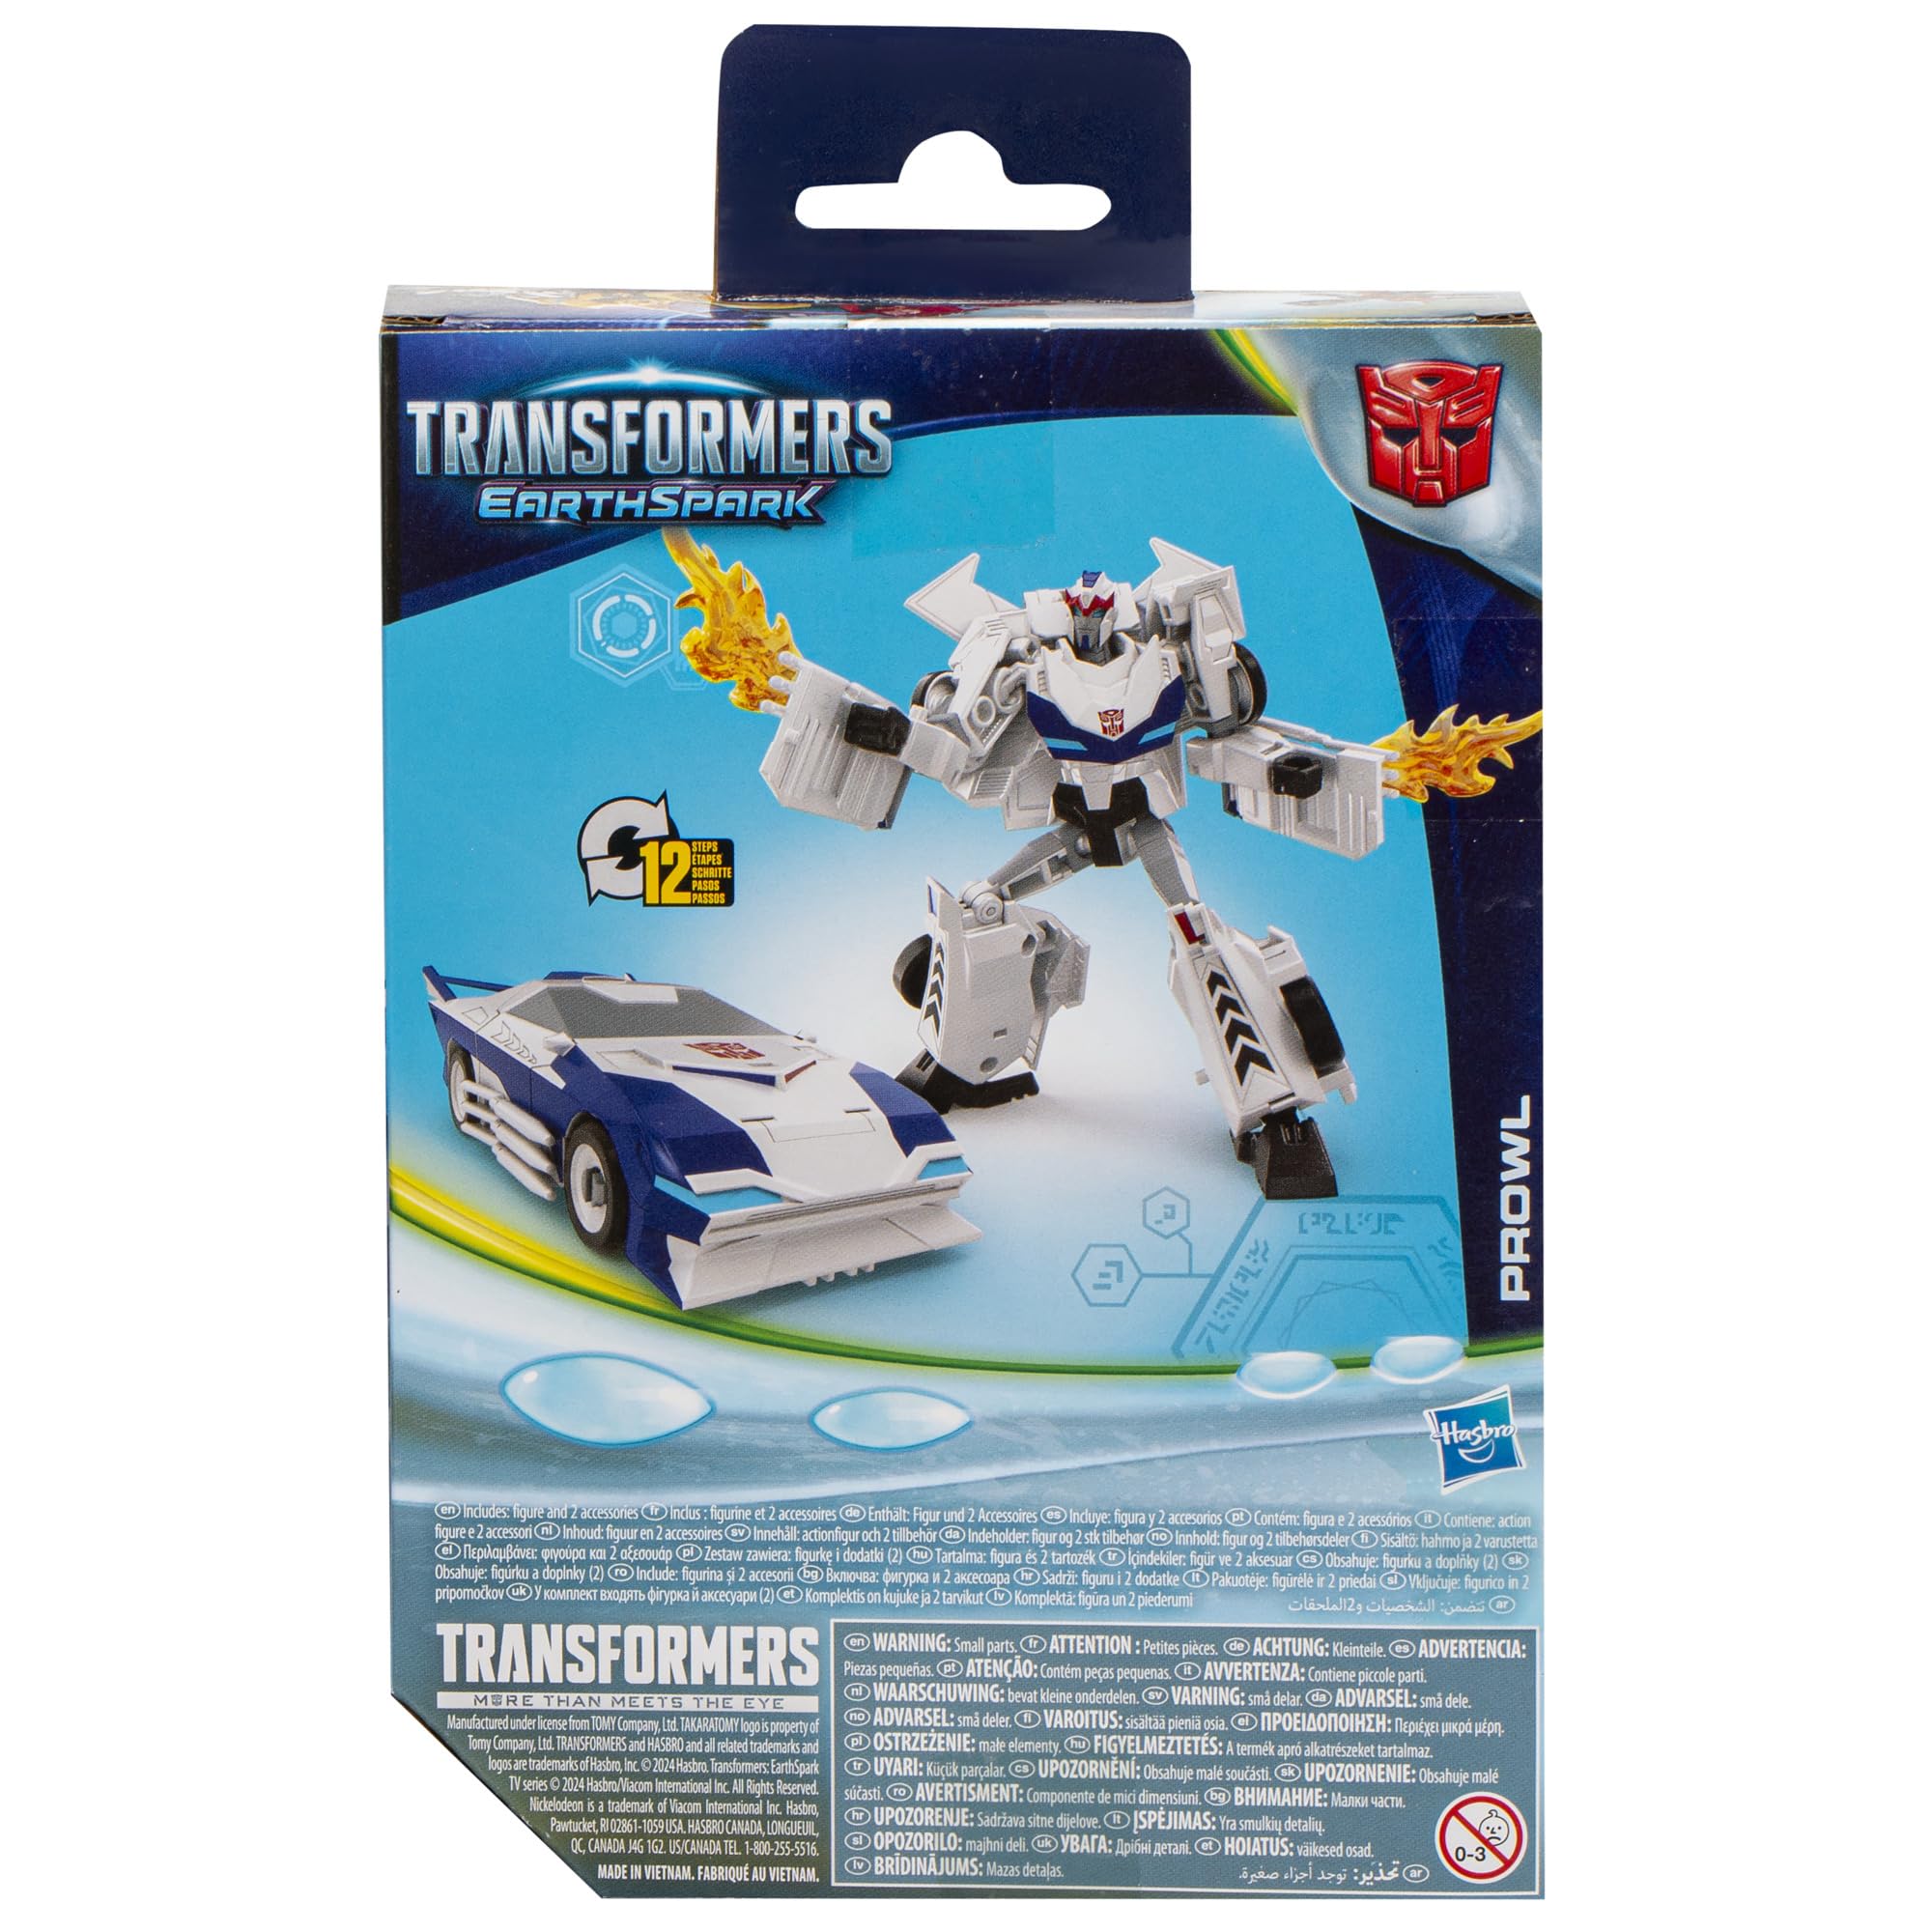 TRANSFORMERS EarthSpark Deluxe Class Prowl 5-Inch Robot Action Figure, Converts in 12 Steps, Interactive Toys for Boys for Girls Age 6 and Up